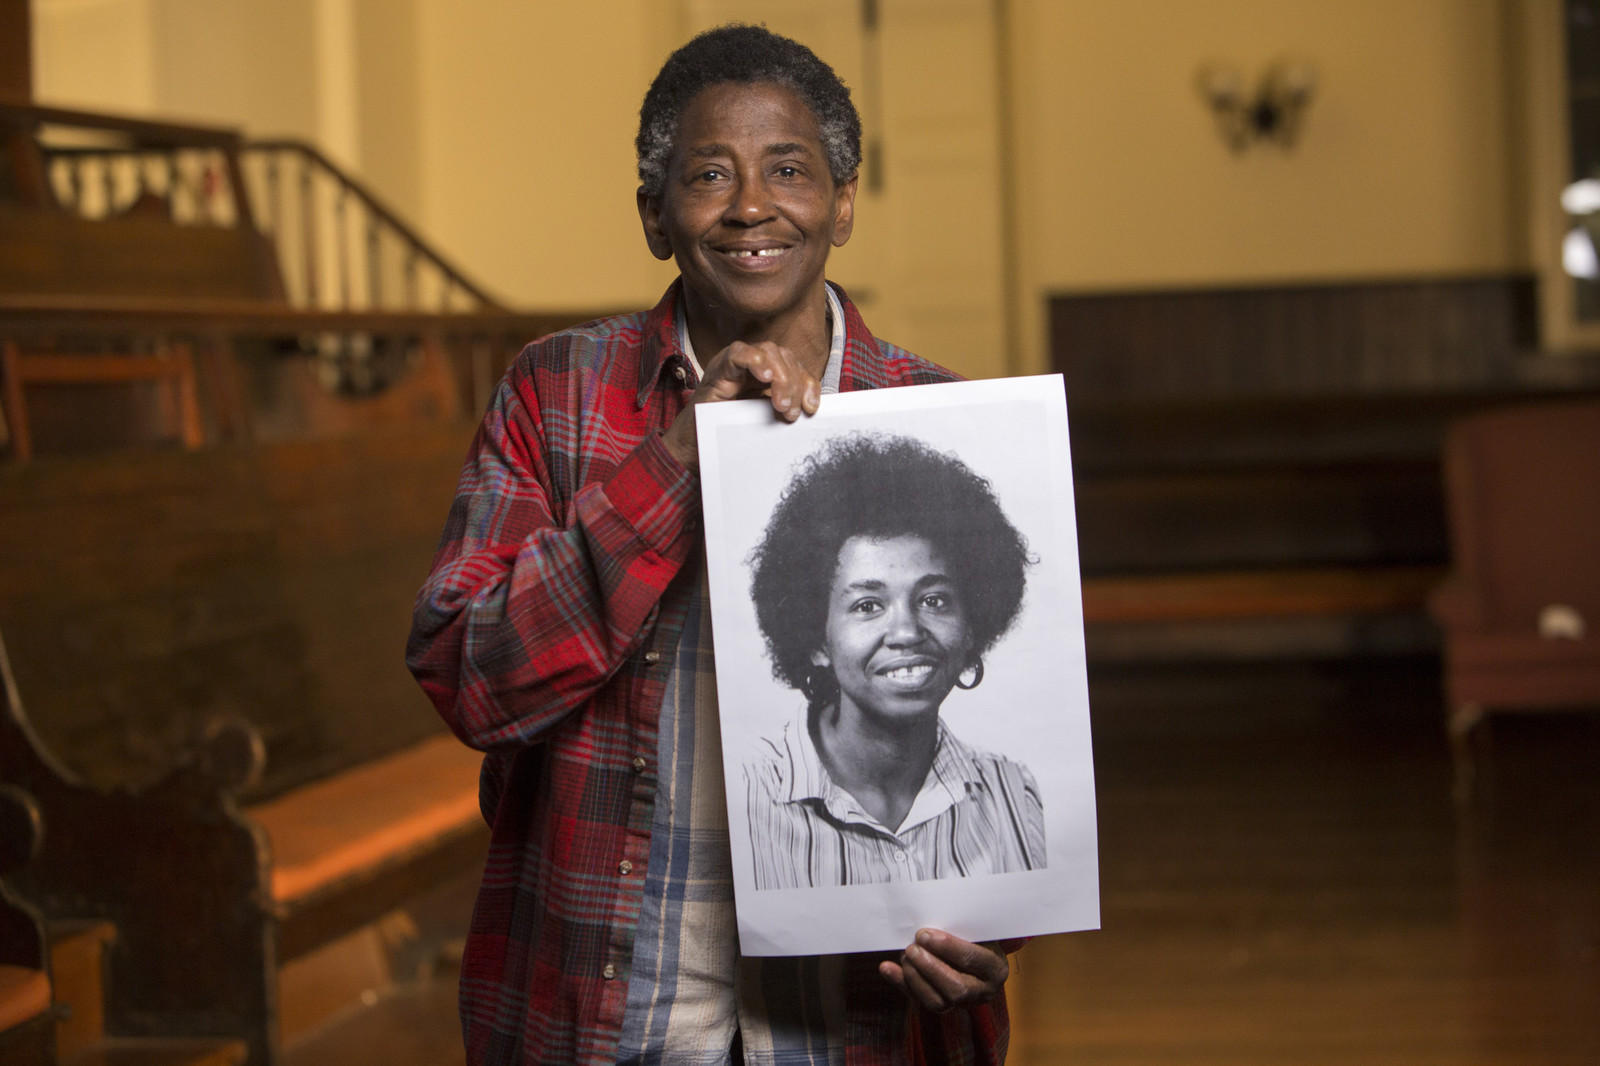 person holding up a portrait of themselves when they were younger